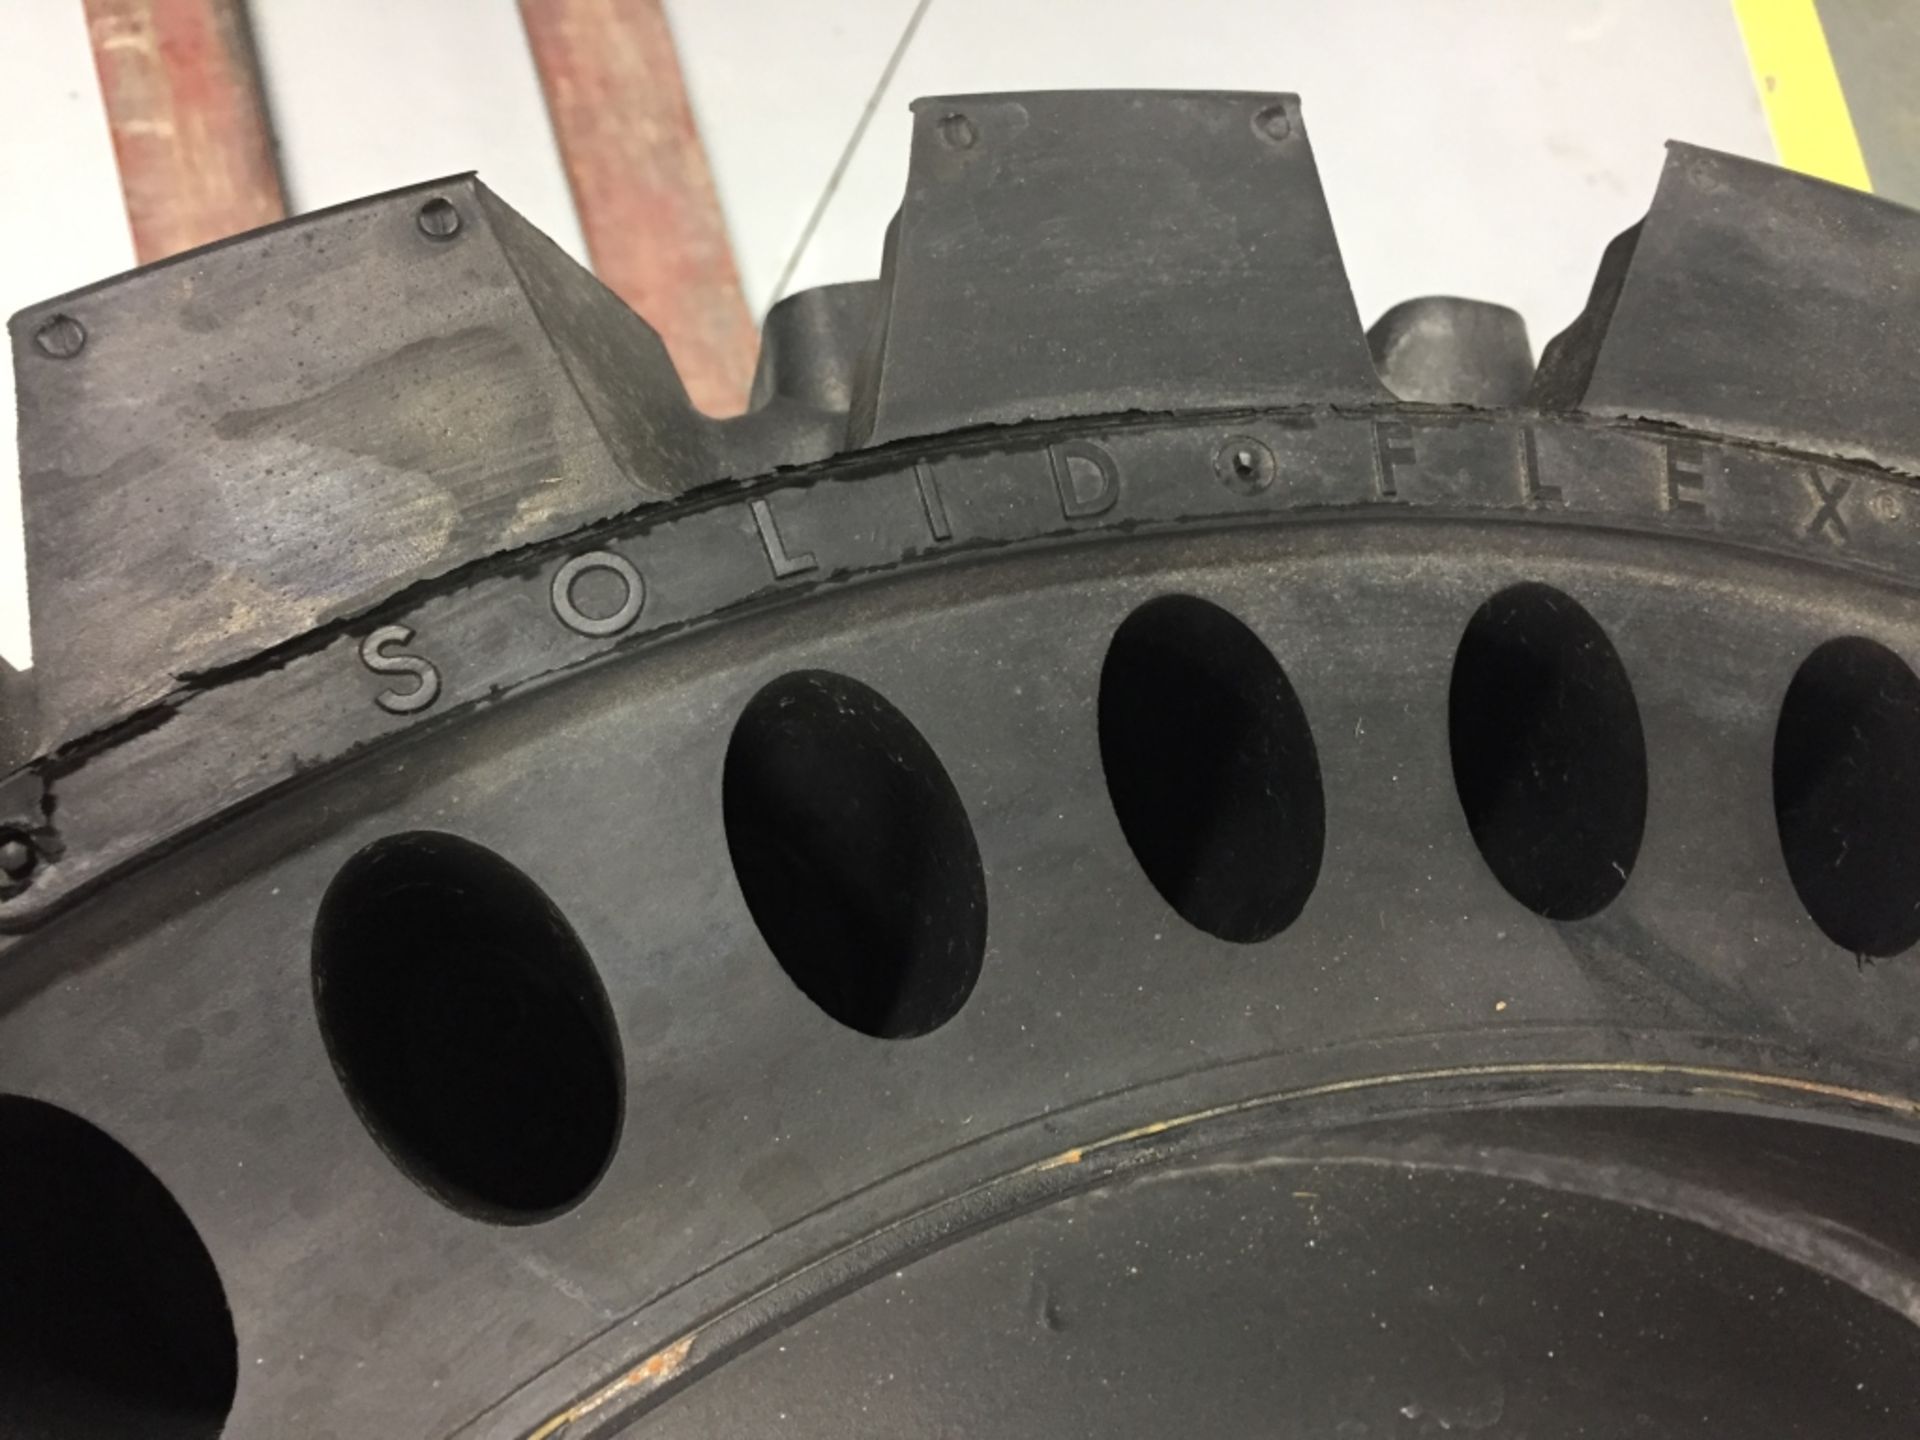 (4) New Solid Flex Mitl 12-16.5 Tire & Rims, 6" Center, 8 Bolt Pattern, Fits Skid Loader, Located in - Image 2 of 7